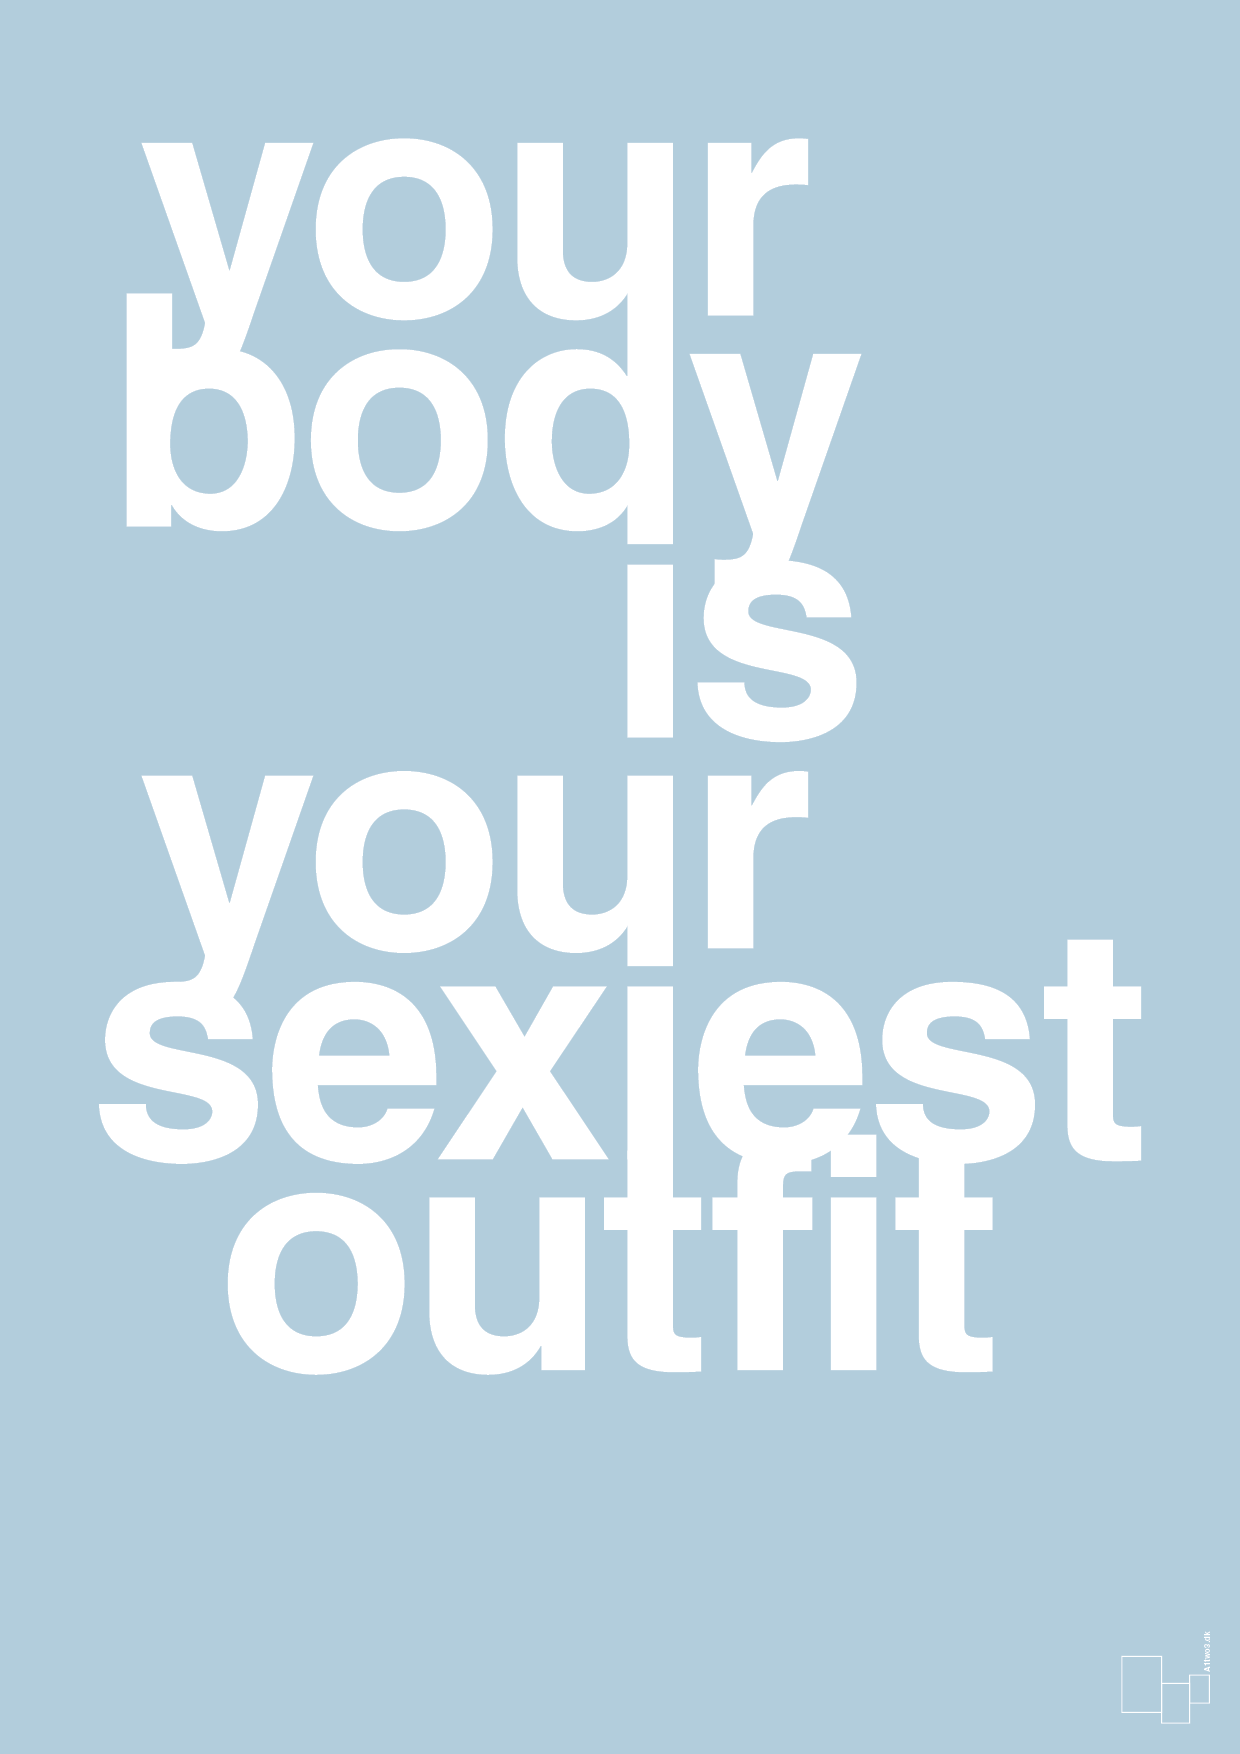 your body is your sexiest outfit - Plakat med Sport & Fritid i Heavenly Blue